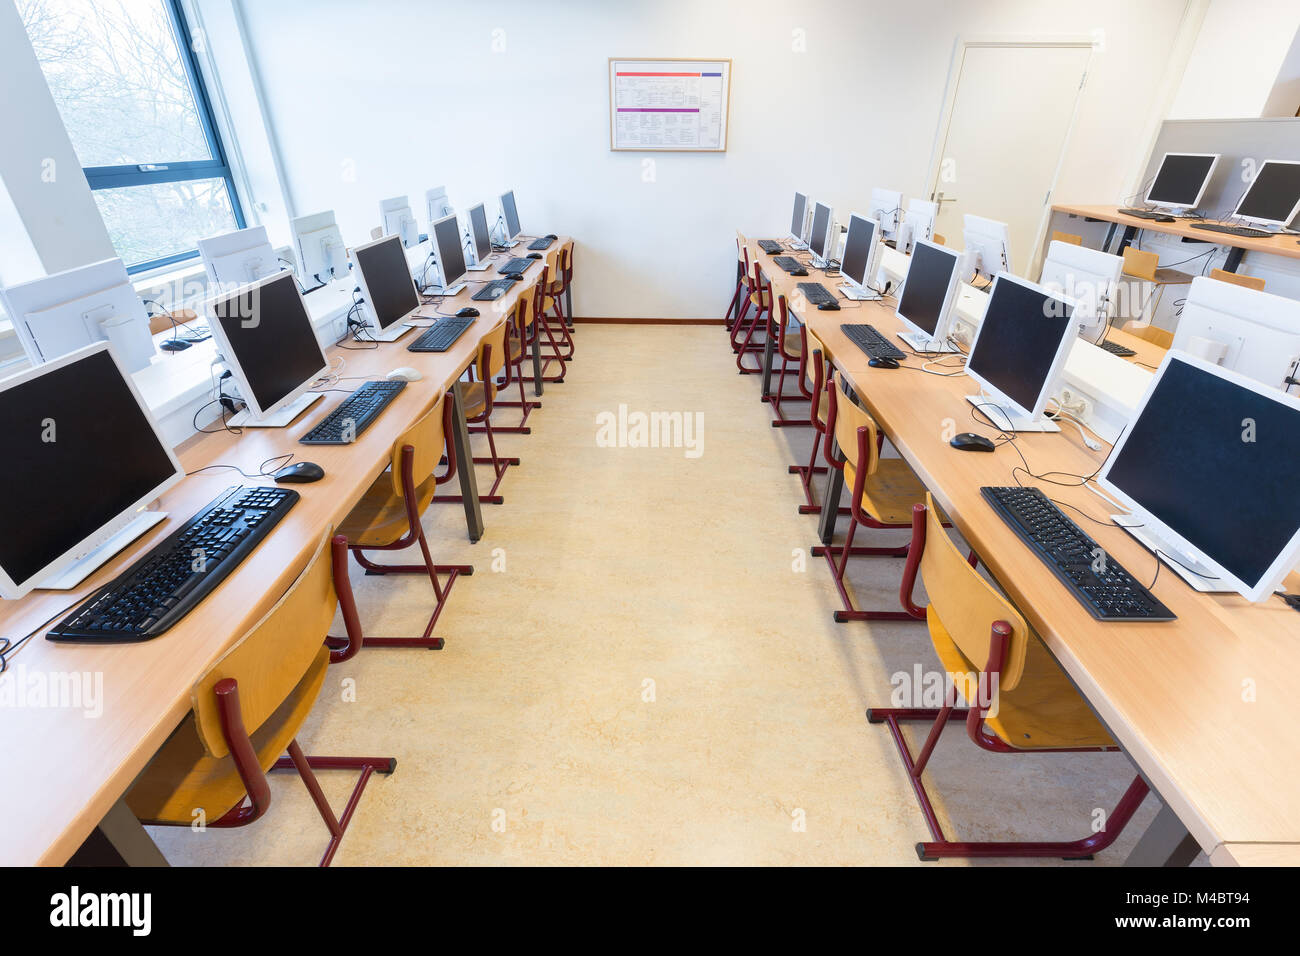 Computers in classroom of dutch secondary education Stock Photo